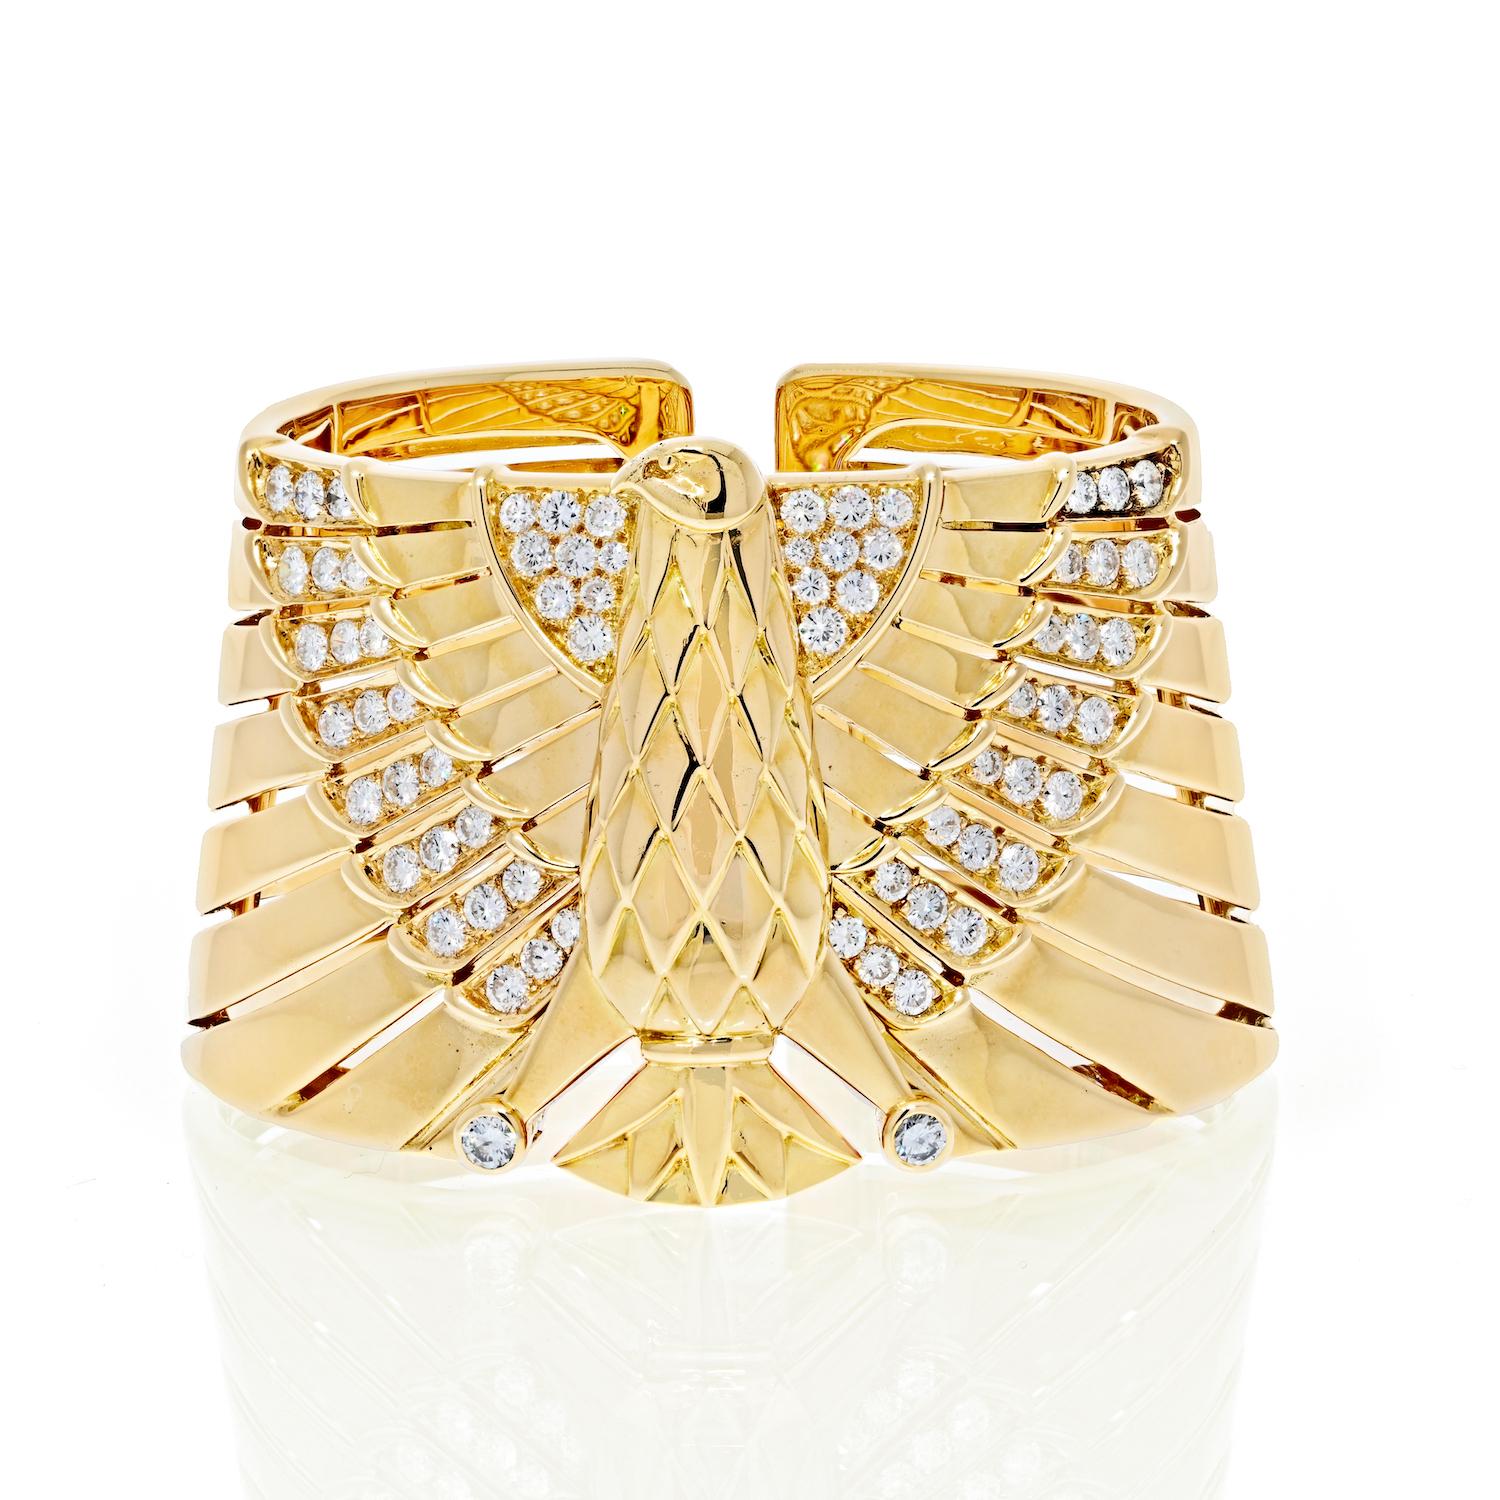 Absolutely stunning so special and unique this Egyptian Revival Horus Falcon Diamond Bracelet by Cartier is everything! 

Made in 18k Yellow Gold with round cut diamonds of approx. 4.30 carats, F/G color, VS clarity. The overall weight of the